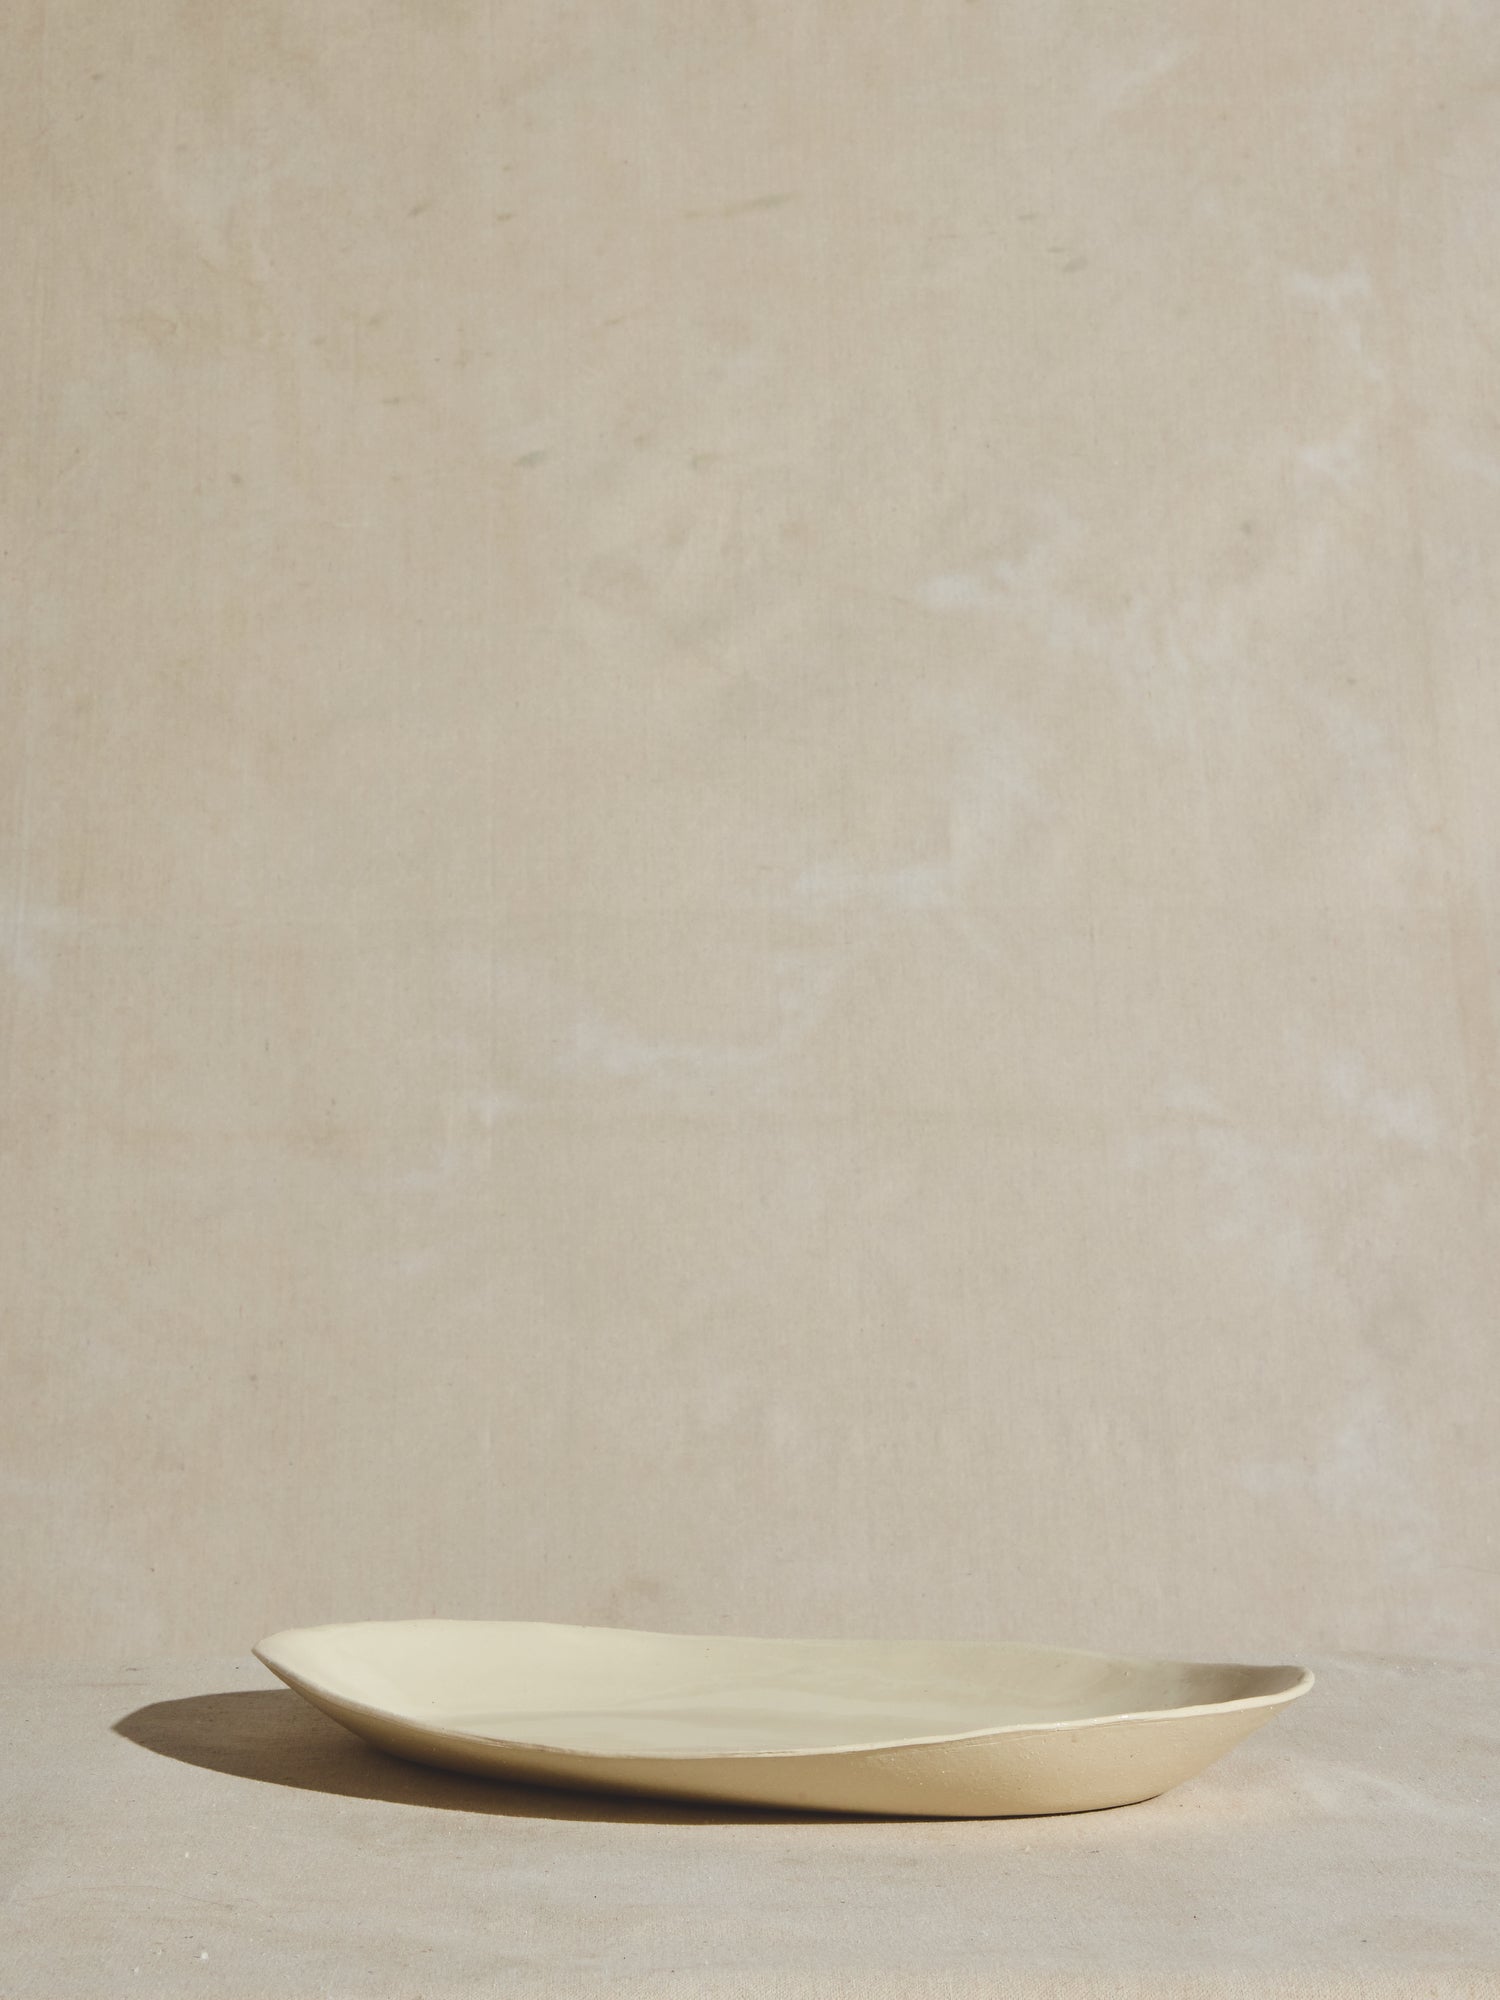 Hand thrown artisan serving platter with natural exterior shell and glazed interior.